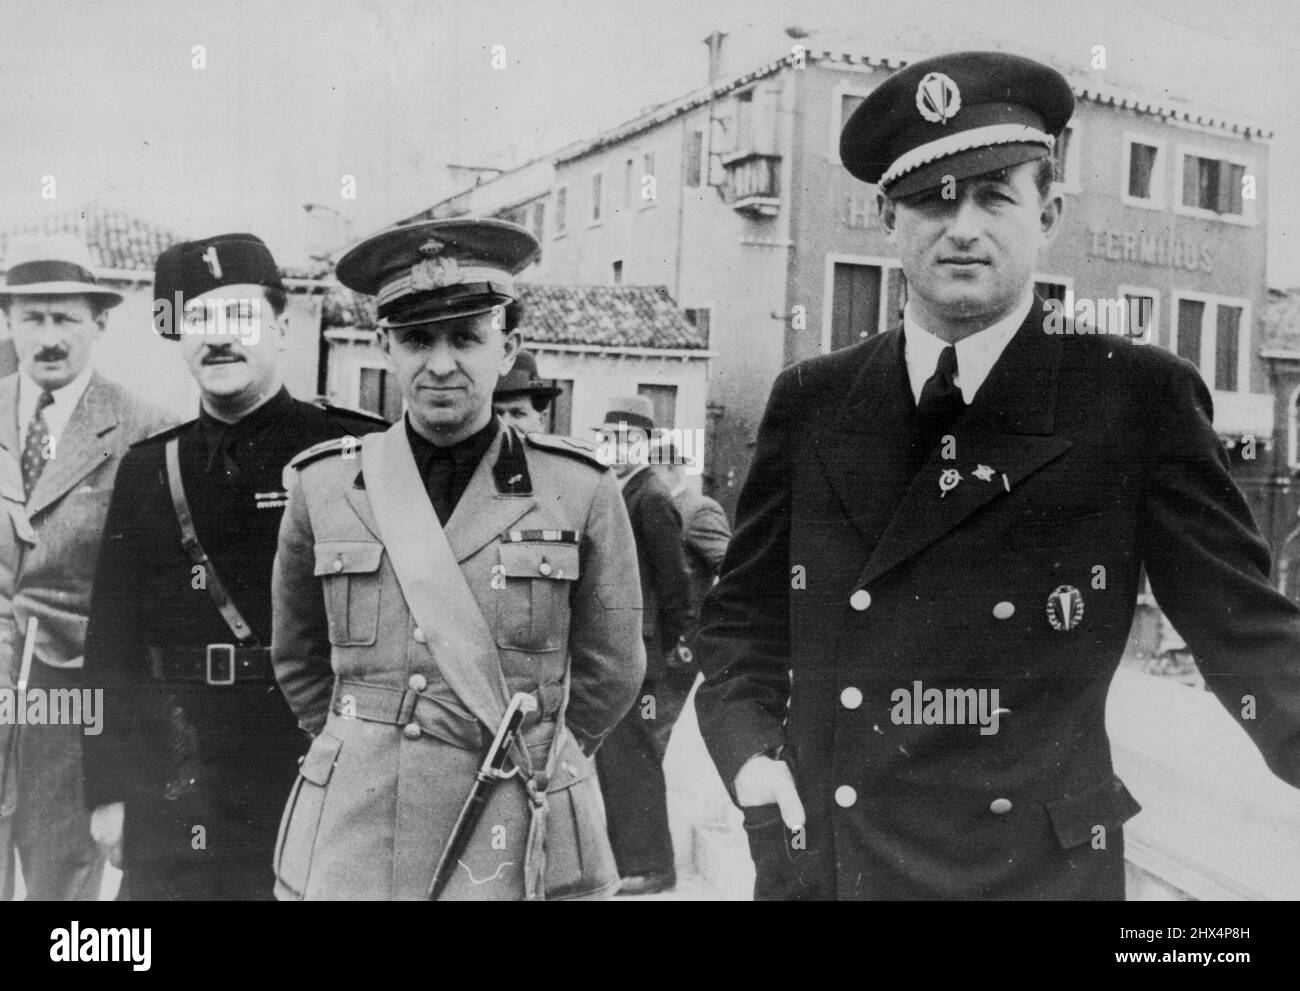 Prince Starhemberg, Ousted by Schuschnigg, in Italy with Austrian Footballer. Interview with Mussolini -- Prince Starhemberg (right) wearing the new uniform of the Australia football team, with members of the Italian foscist party in Venice. These exclusive pictures, which have just been received in London, show Prince Starhemberg, recently ousted from the Austrain vice-Chancellorship by Dr. Schuschnigg, on arrival in Venice with members of the Austrian football team. May 18, 1936. (Photo by Kosmos Press Bureau). Stock Photo